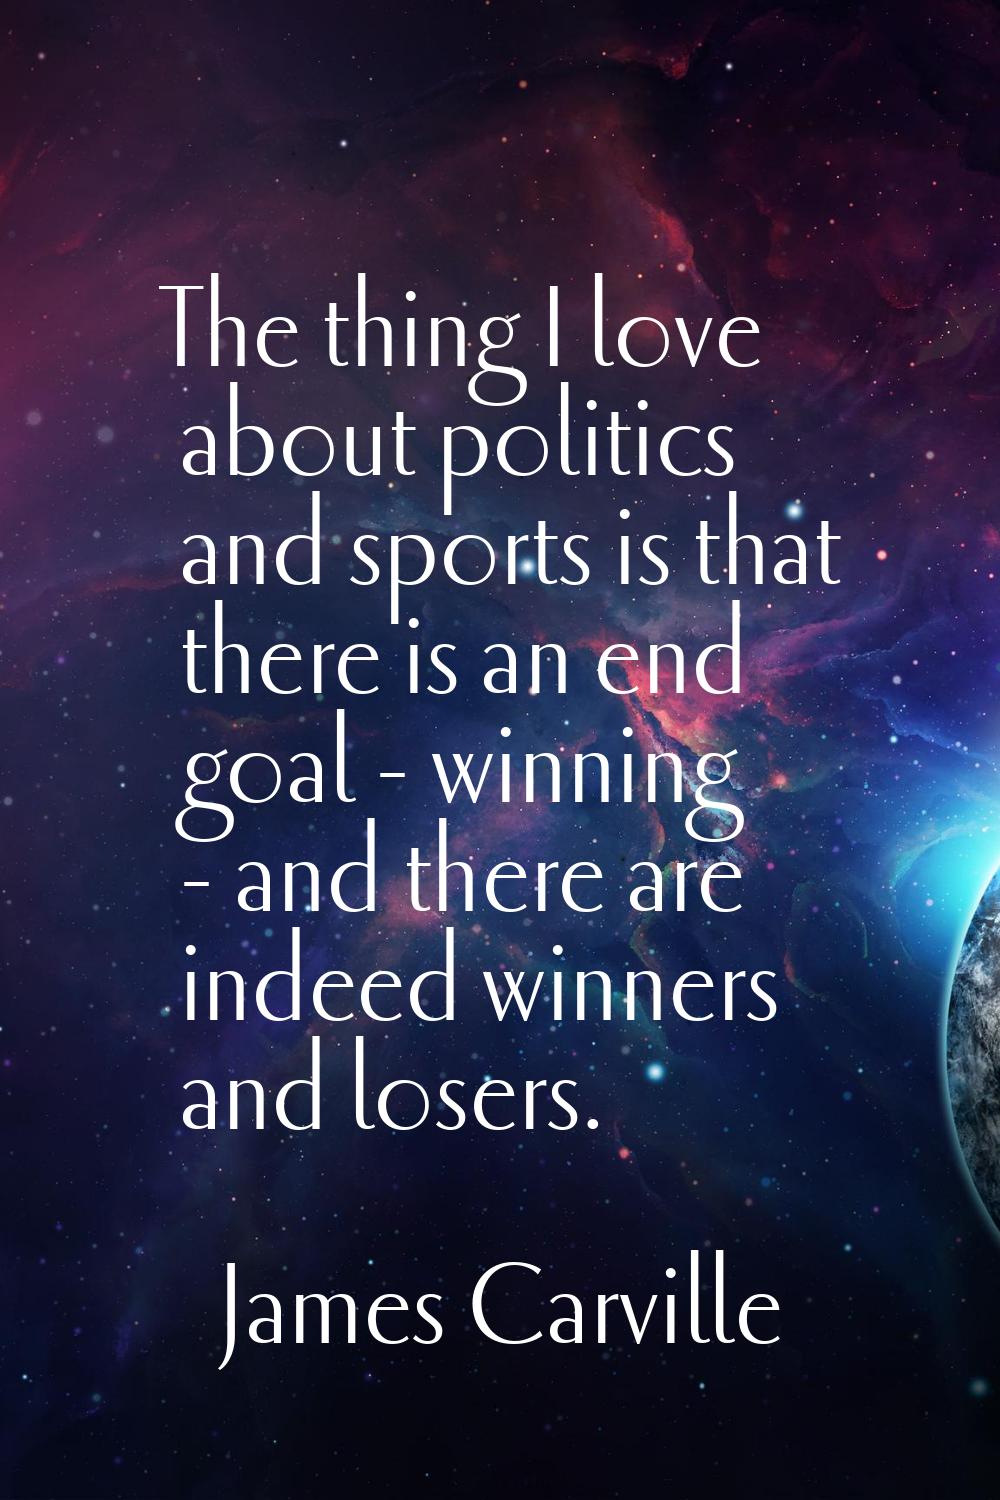 The thing I love about politics and sports is that there is an end goal - winning - and there are i